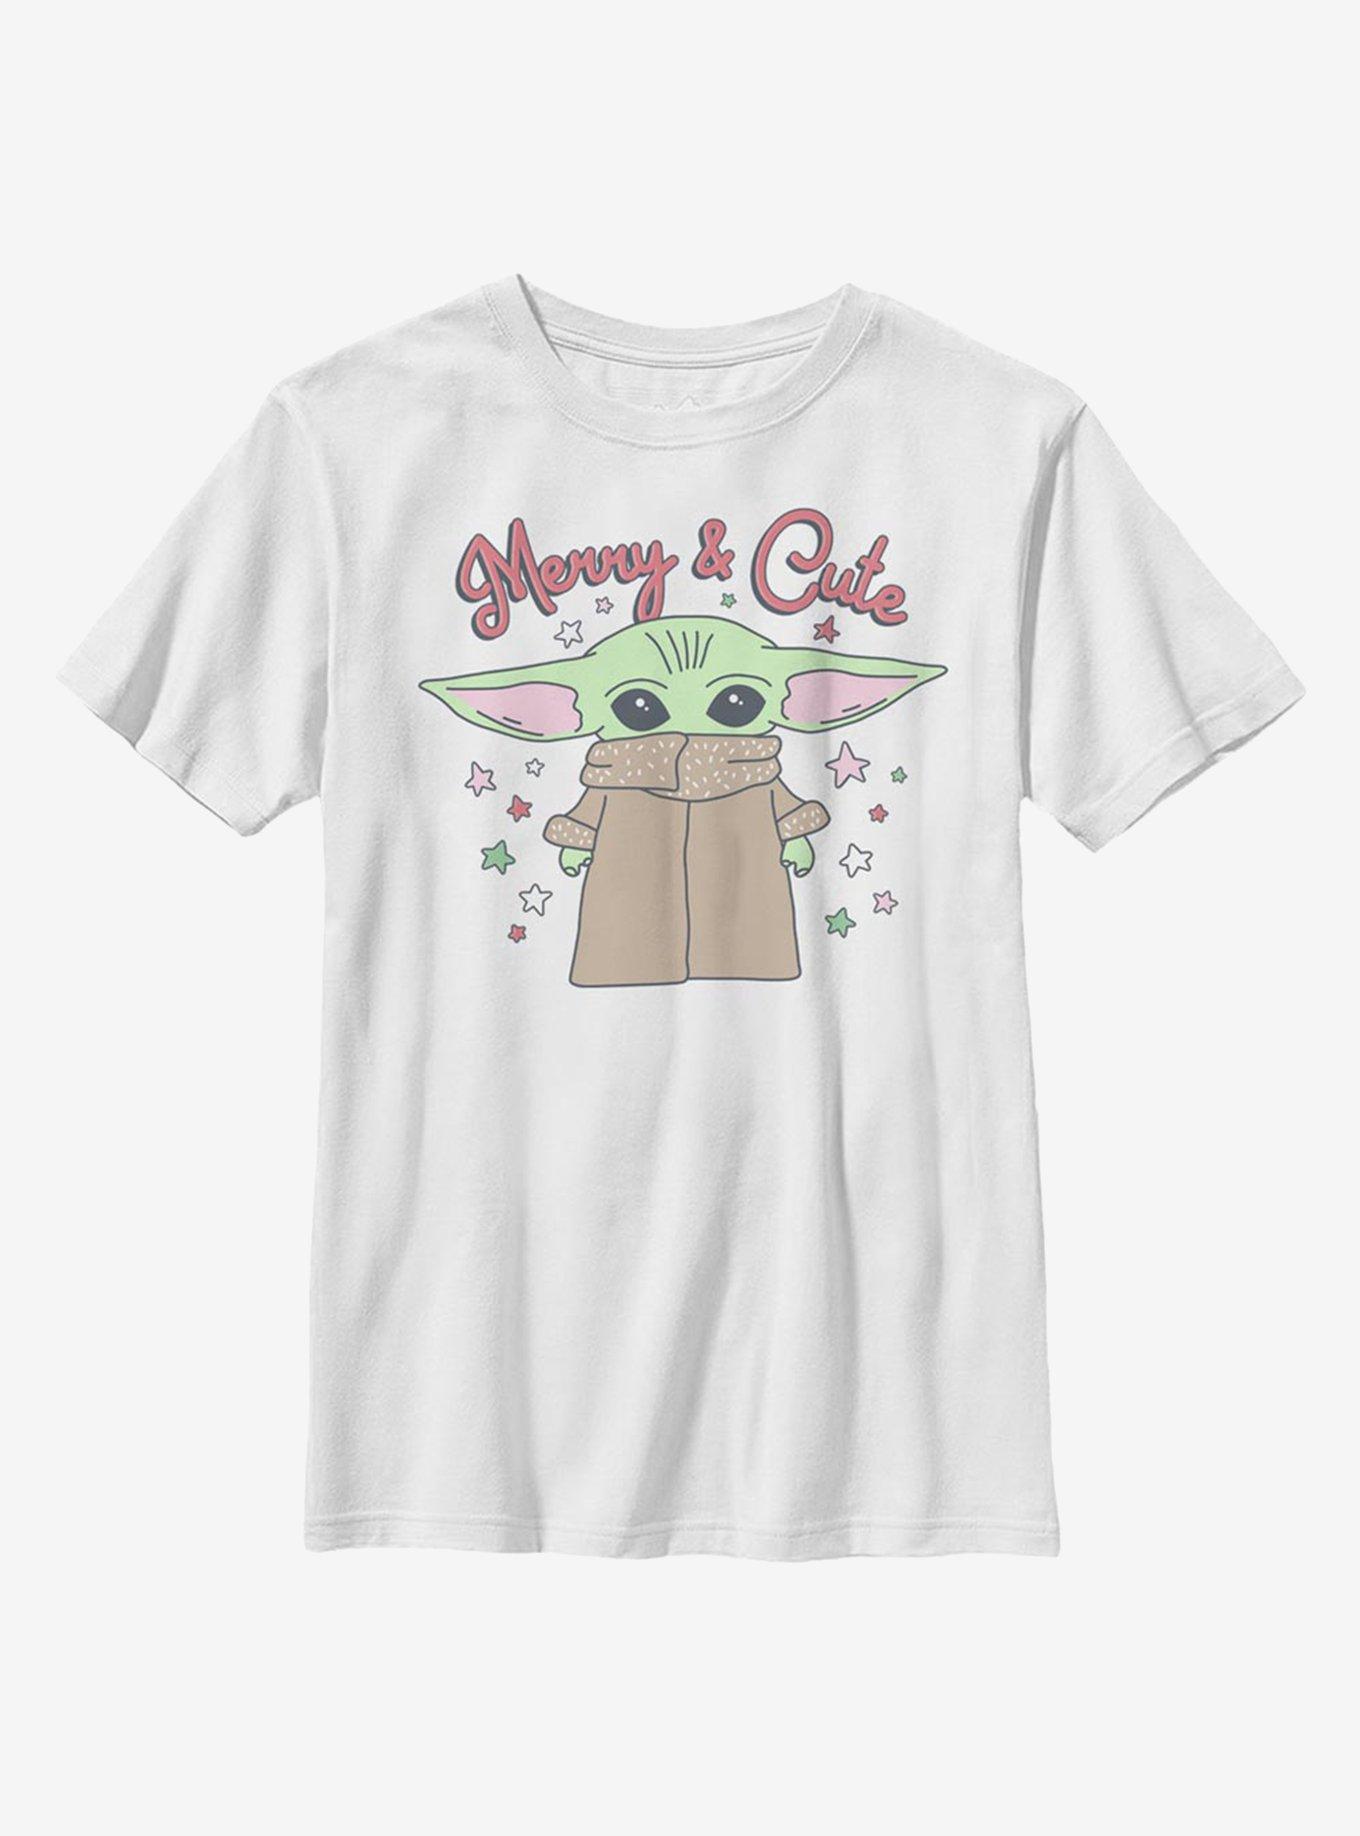 Star Wars The Mandalorian The Child Merry And Cute Youth T-Shirt, WHITE, hi-res